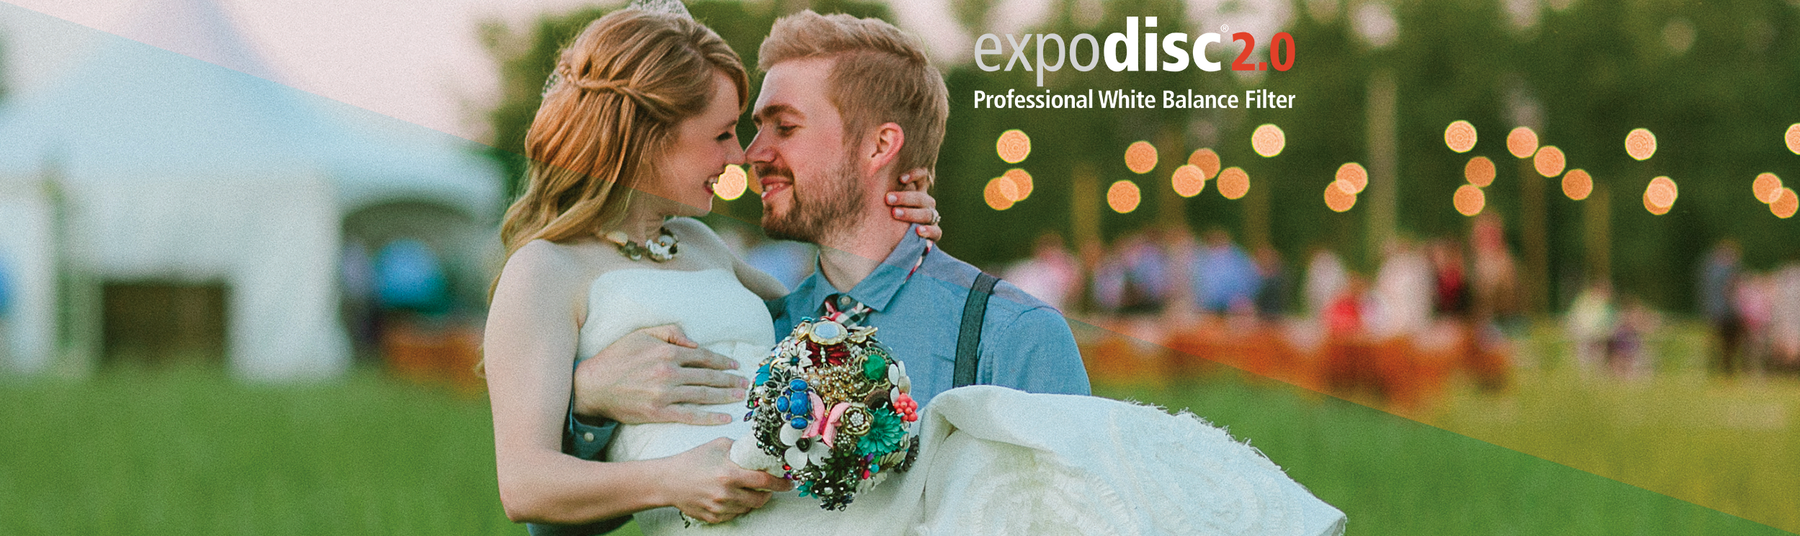 Discover the ExpoDisc Professional White Balance Filter